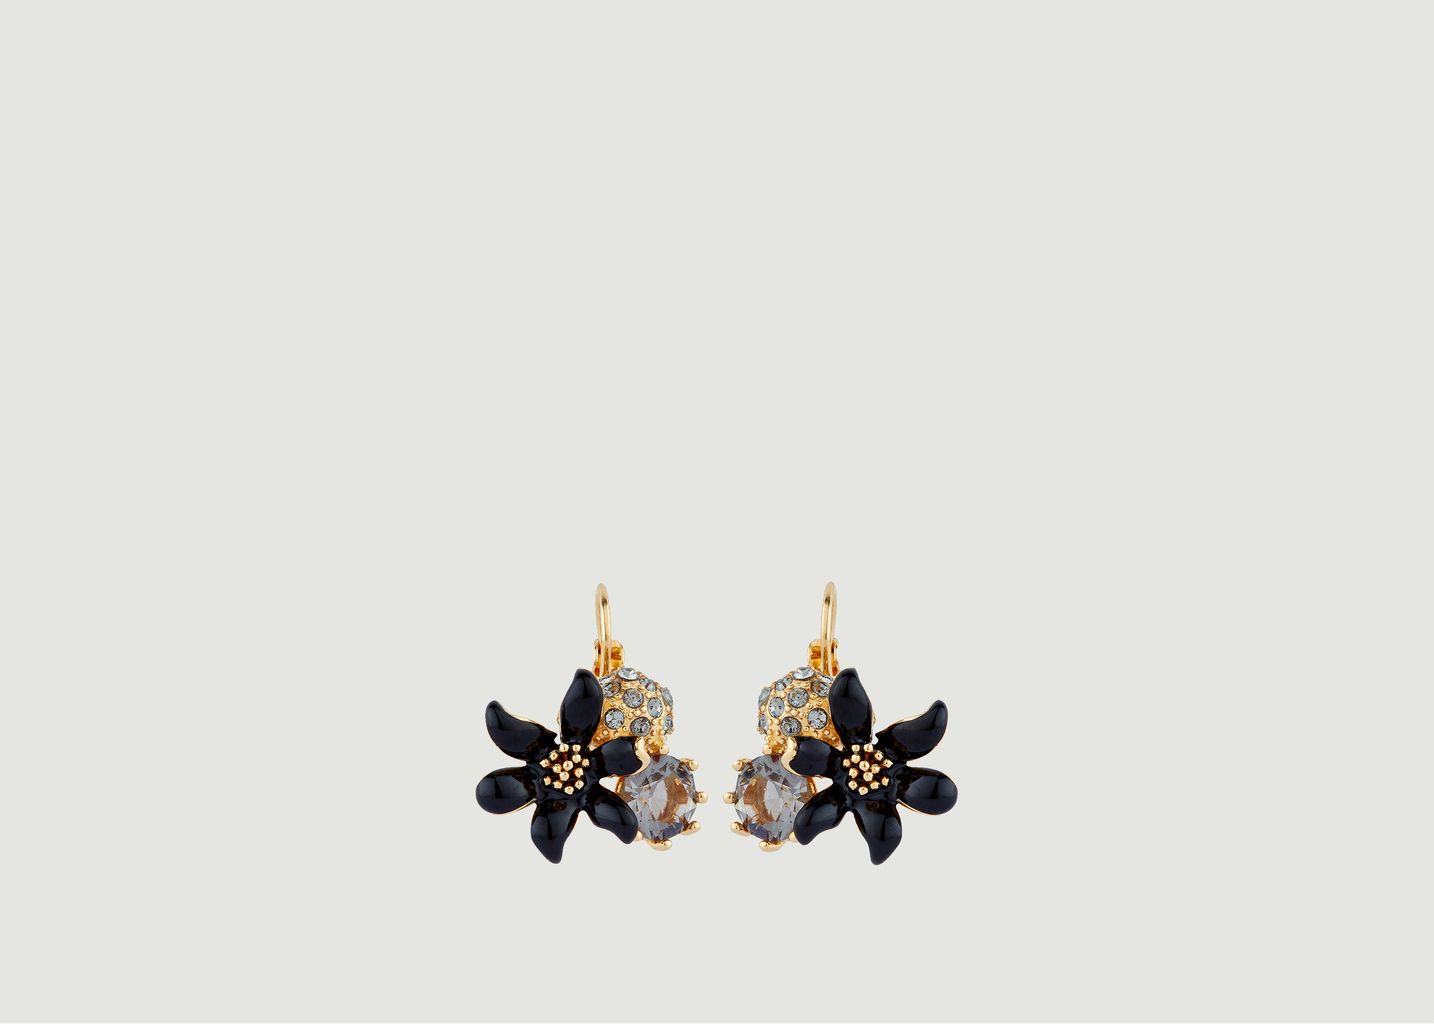 Lily and crystal sleeper earrings - Les Néréides